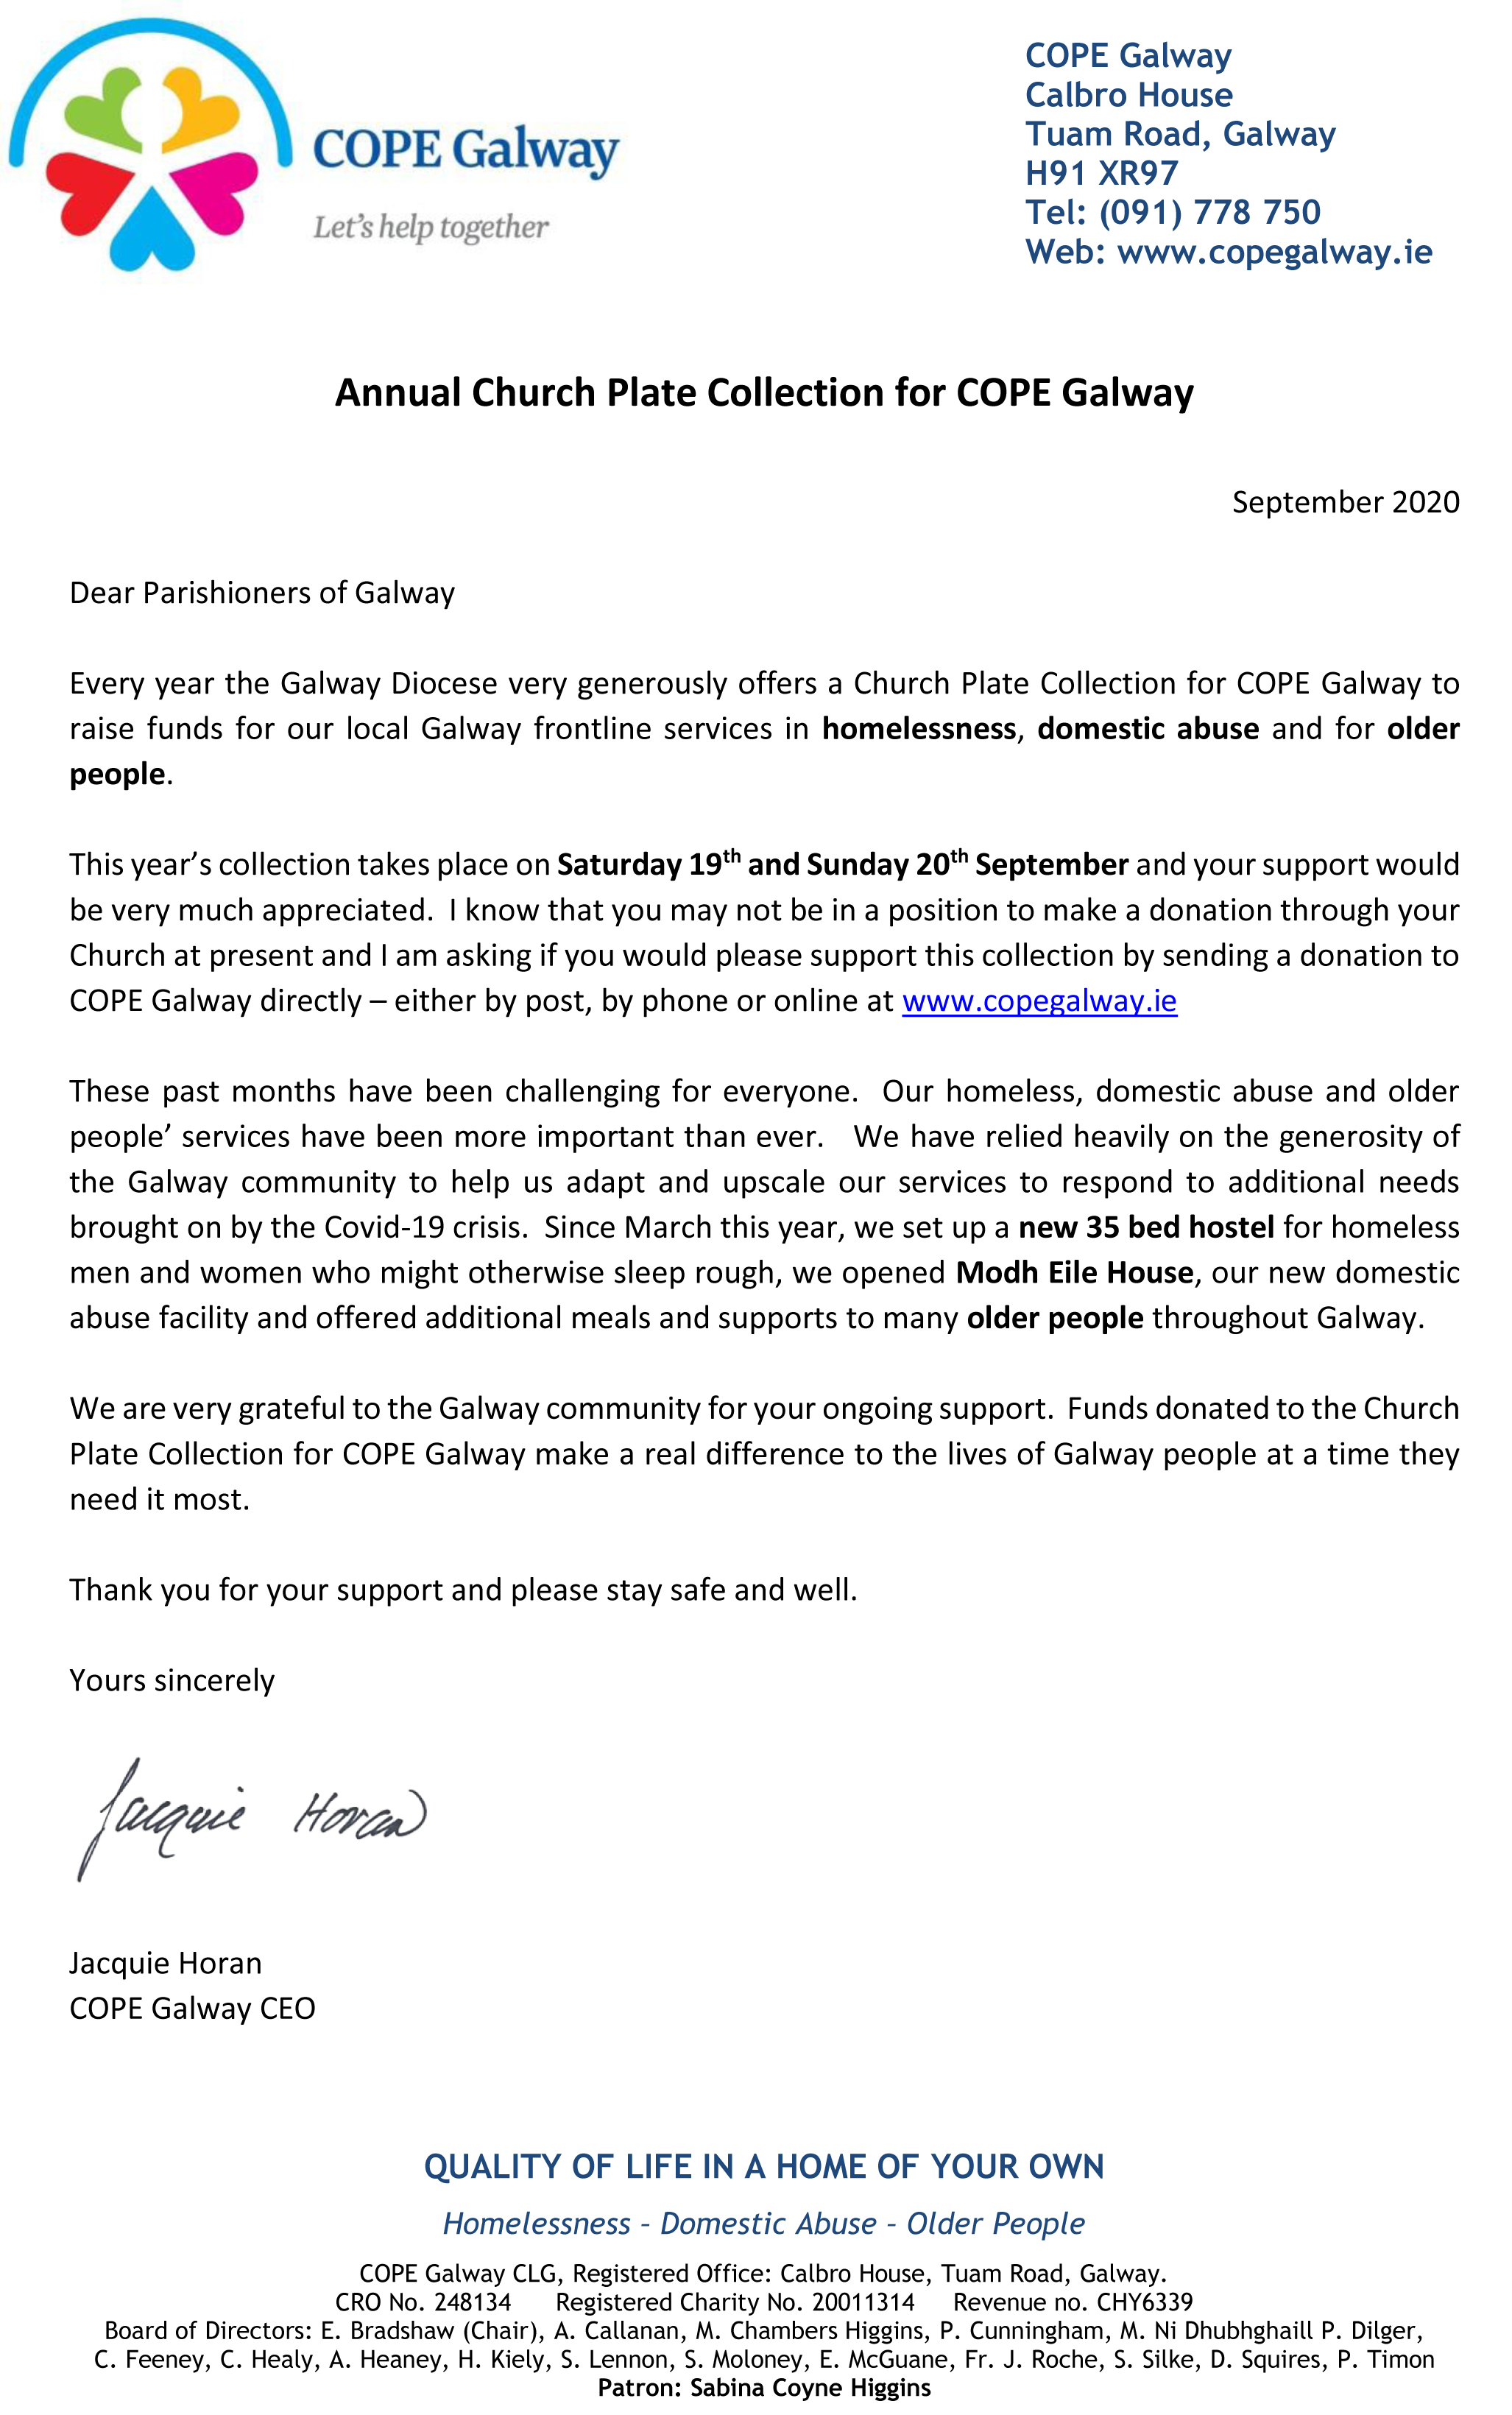 COPE Letter to parishes